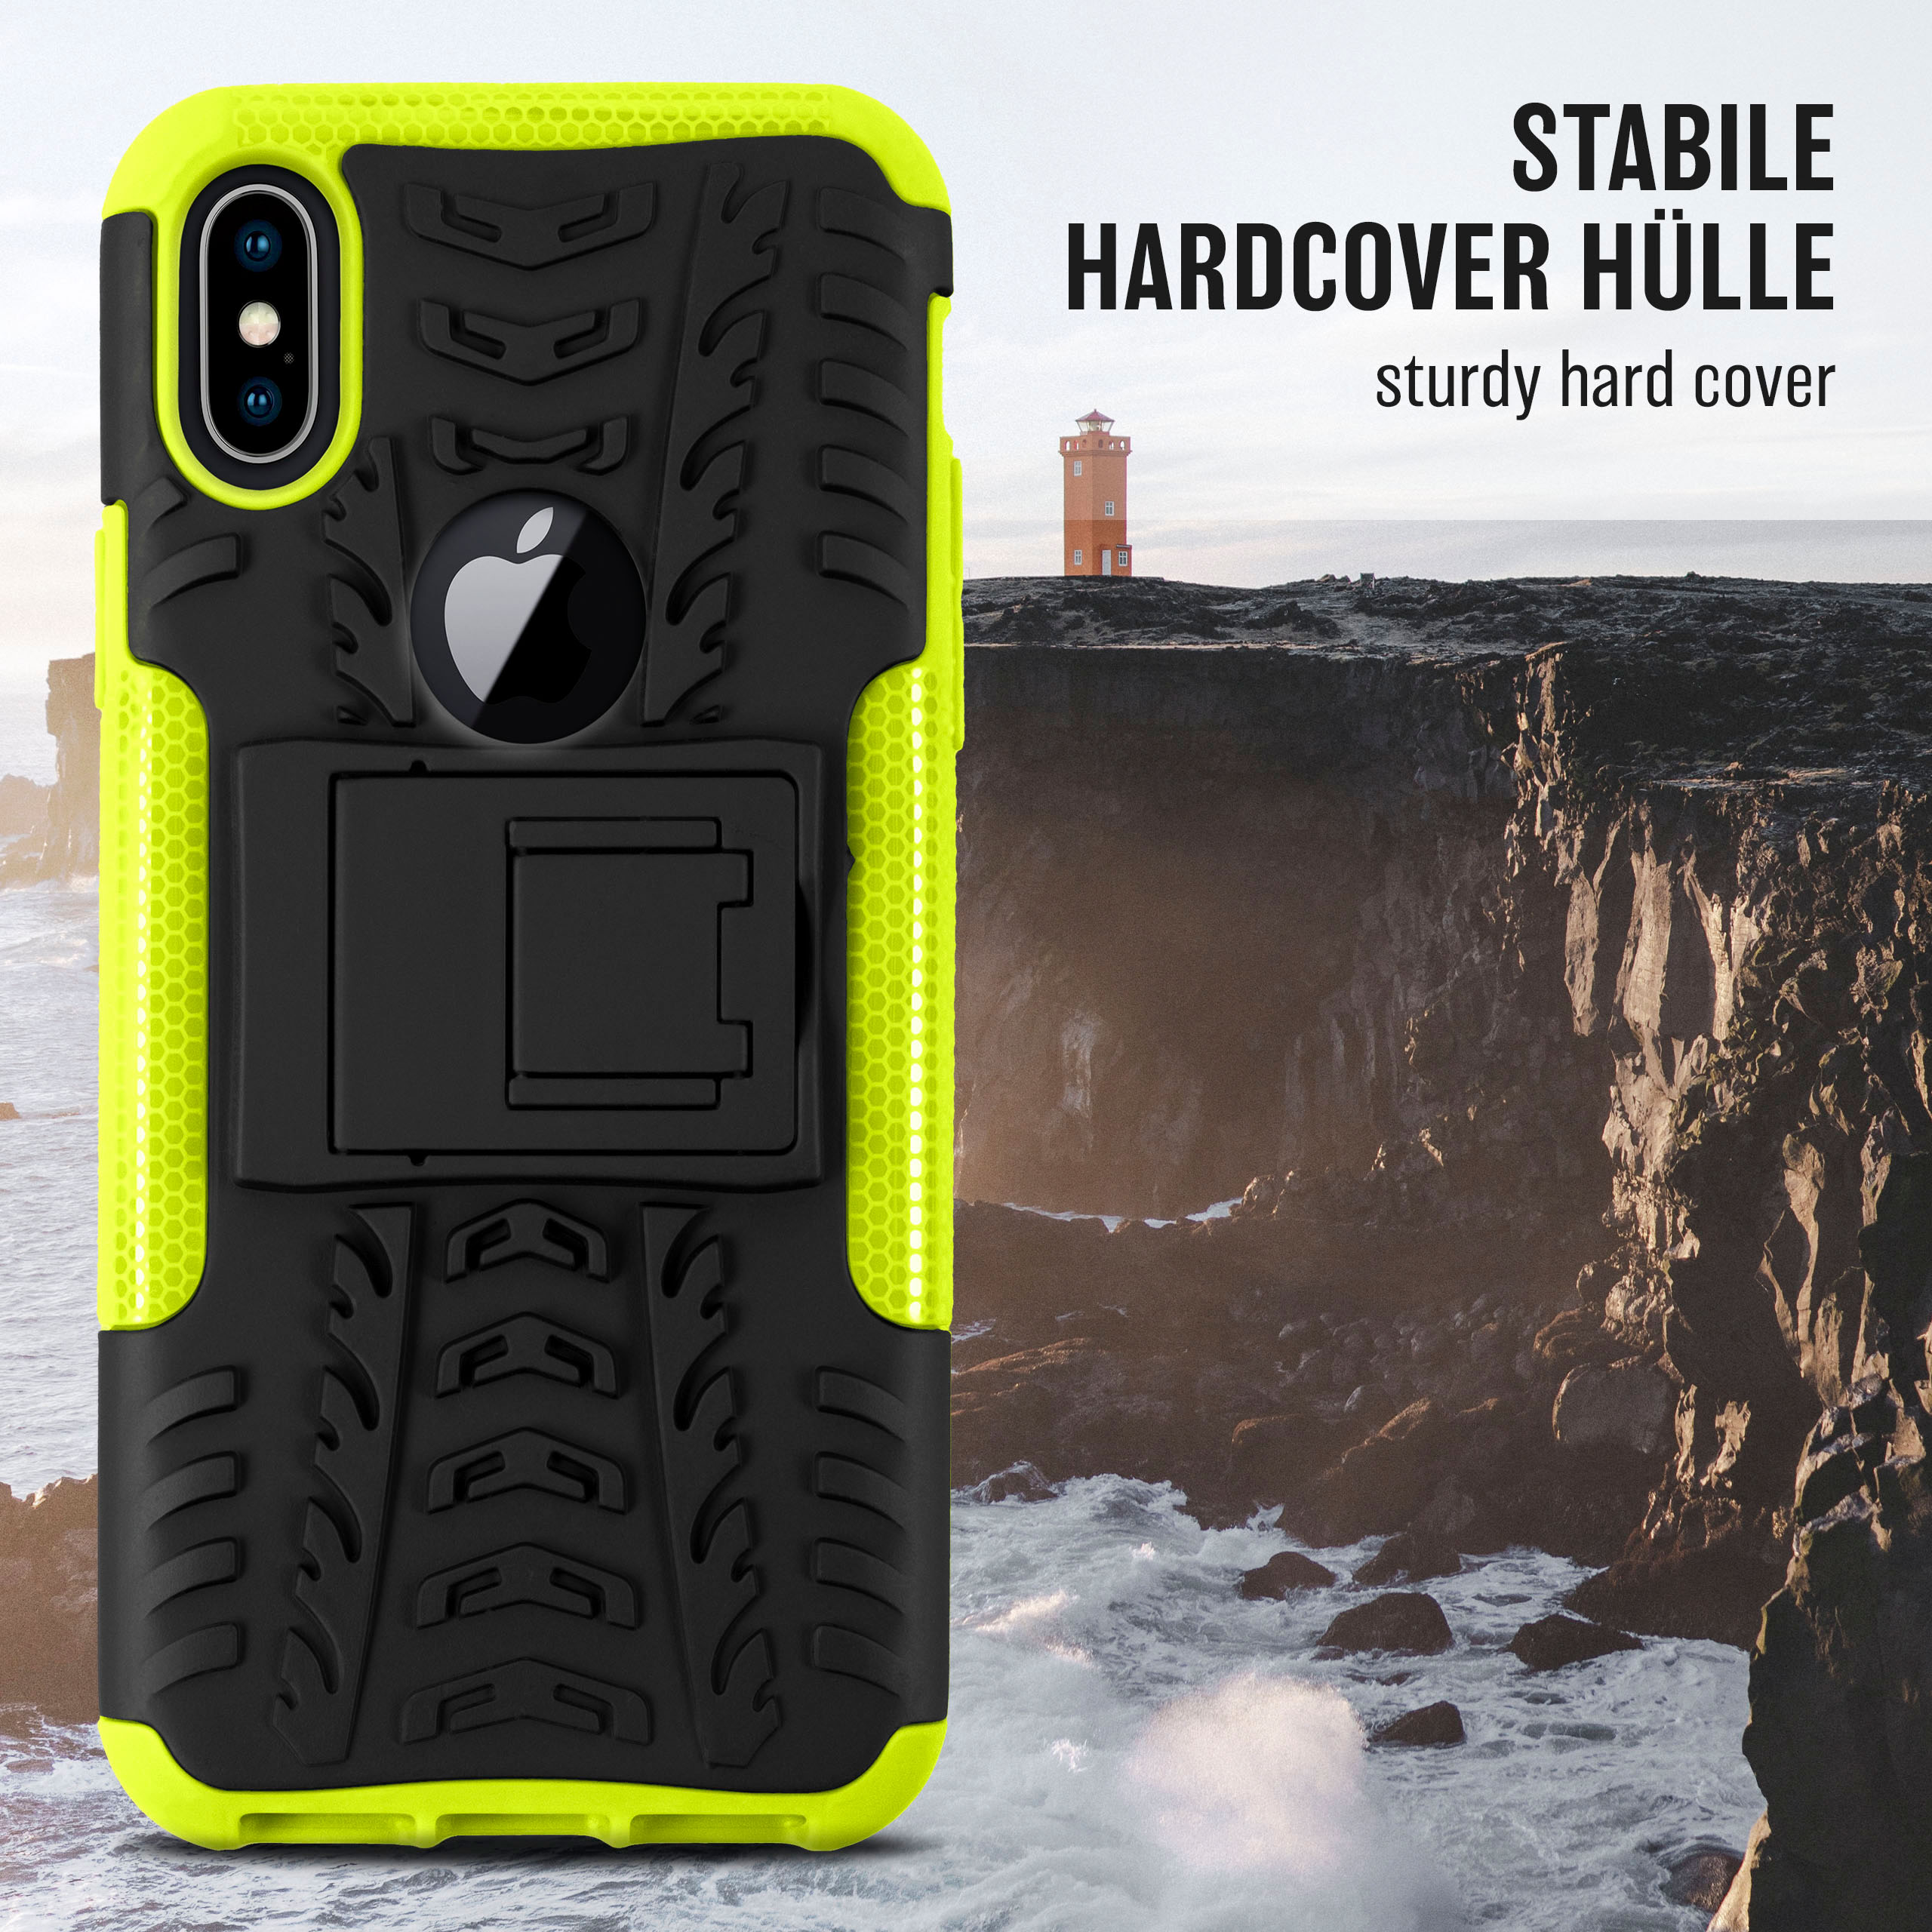 / Apple, Case, iPhone X Backcover, XS, Lime ONEFLOW Tank iPhone